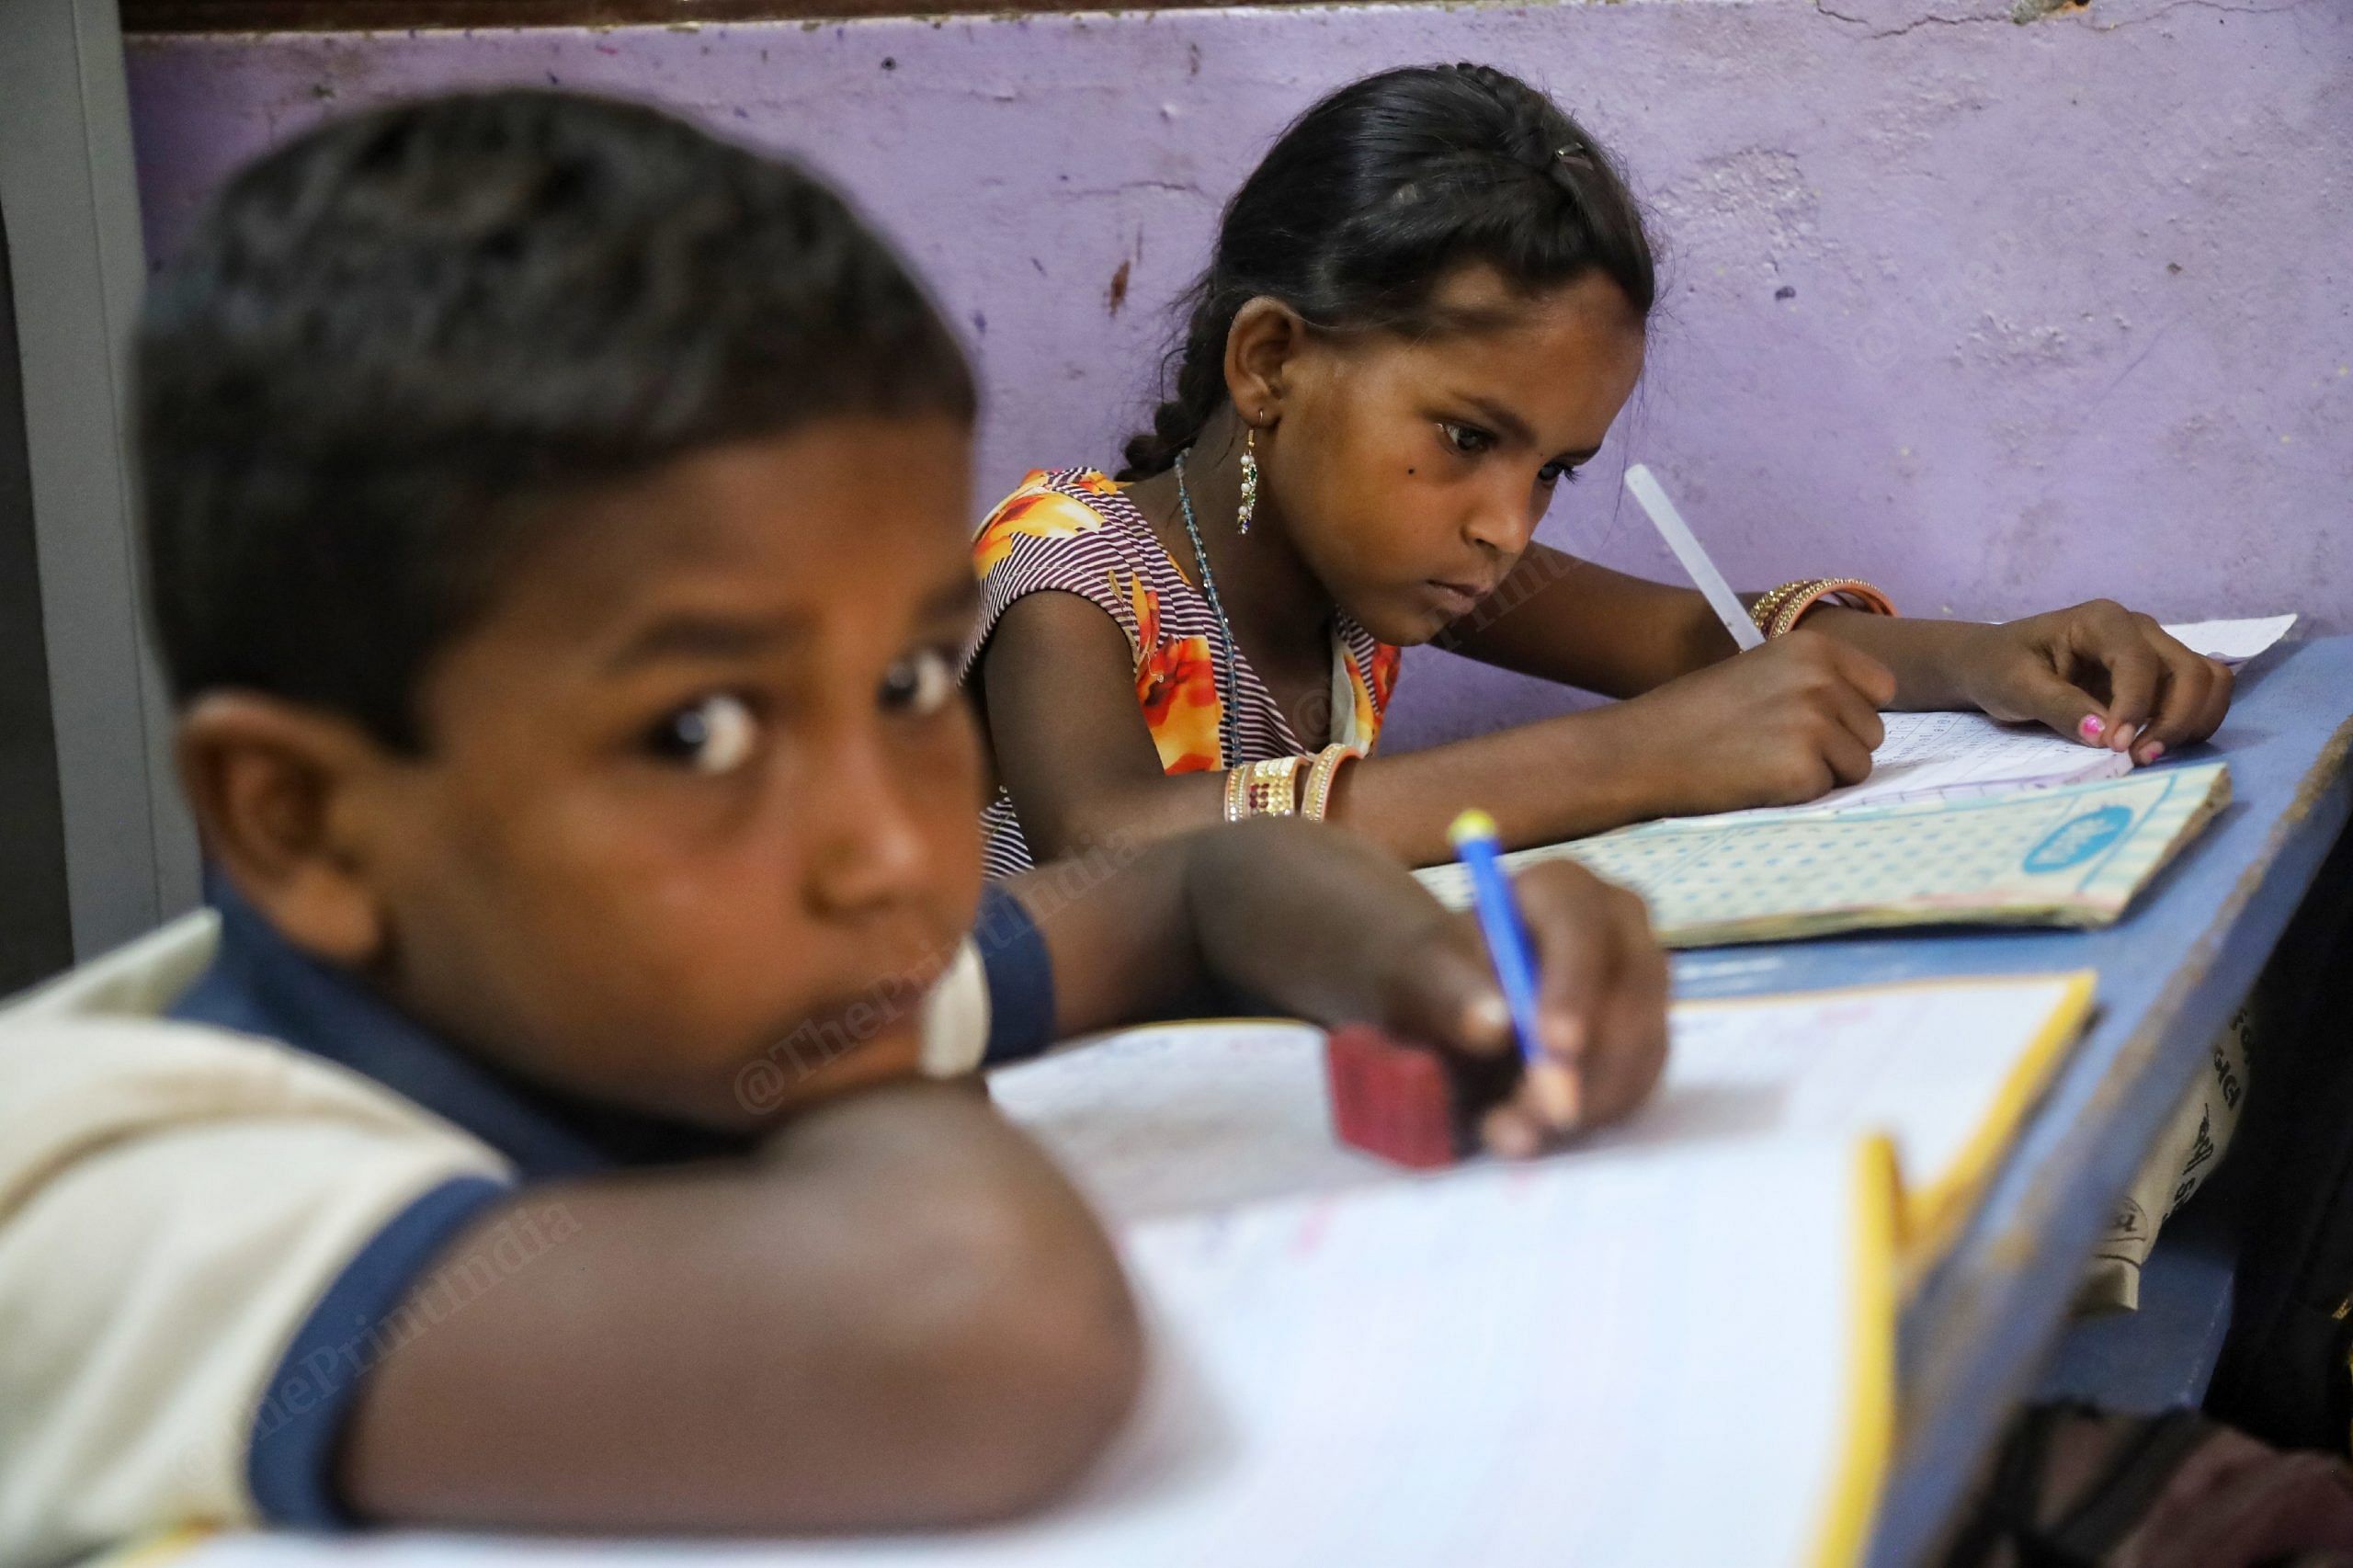 Two students at Shree Shakti Nagar school in Kachchh district work patiently, as their teacher (not in the photo), attends to other students | Photo: Manisha Mondal | ThePrint